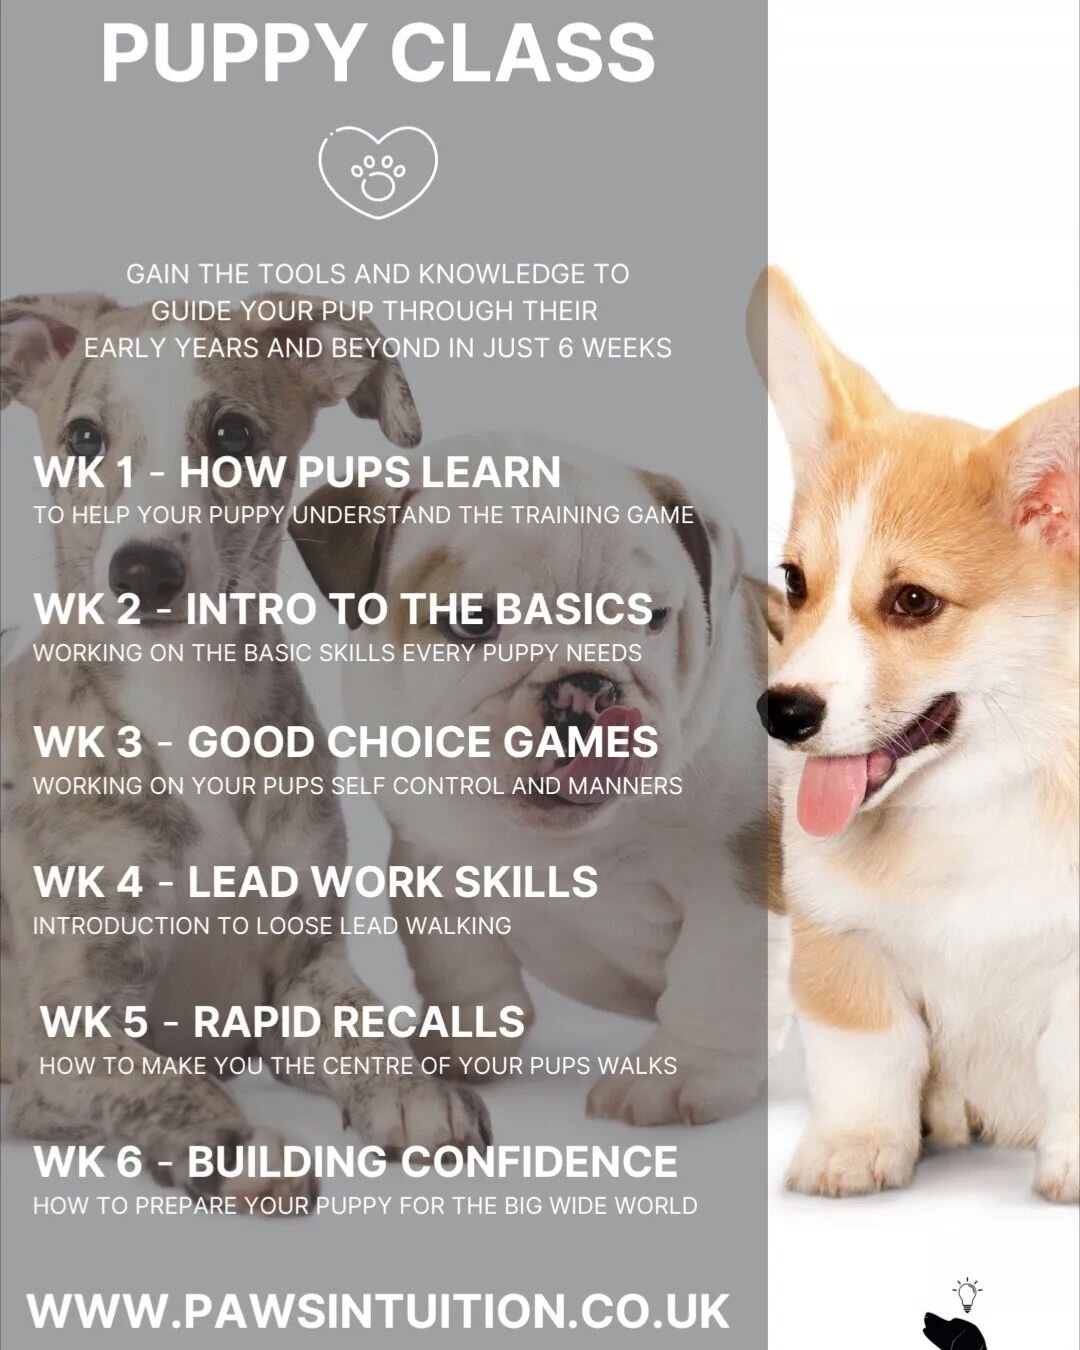 Why not give your puppy the best possible start in life and join one of my fun, friendly classes. They run every Monday evening for a 6 week course for pups aged 12-24 weeks. Check out the website for more information or to book. You won't be disappo